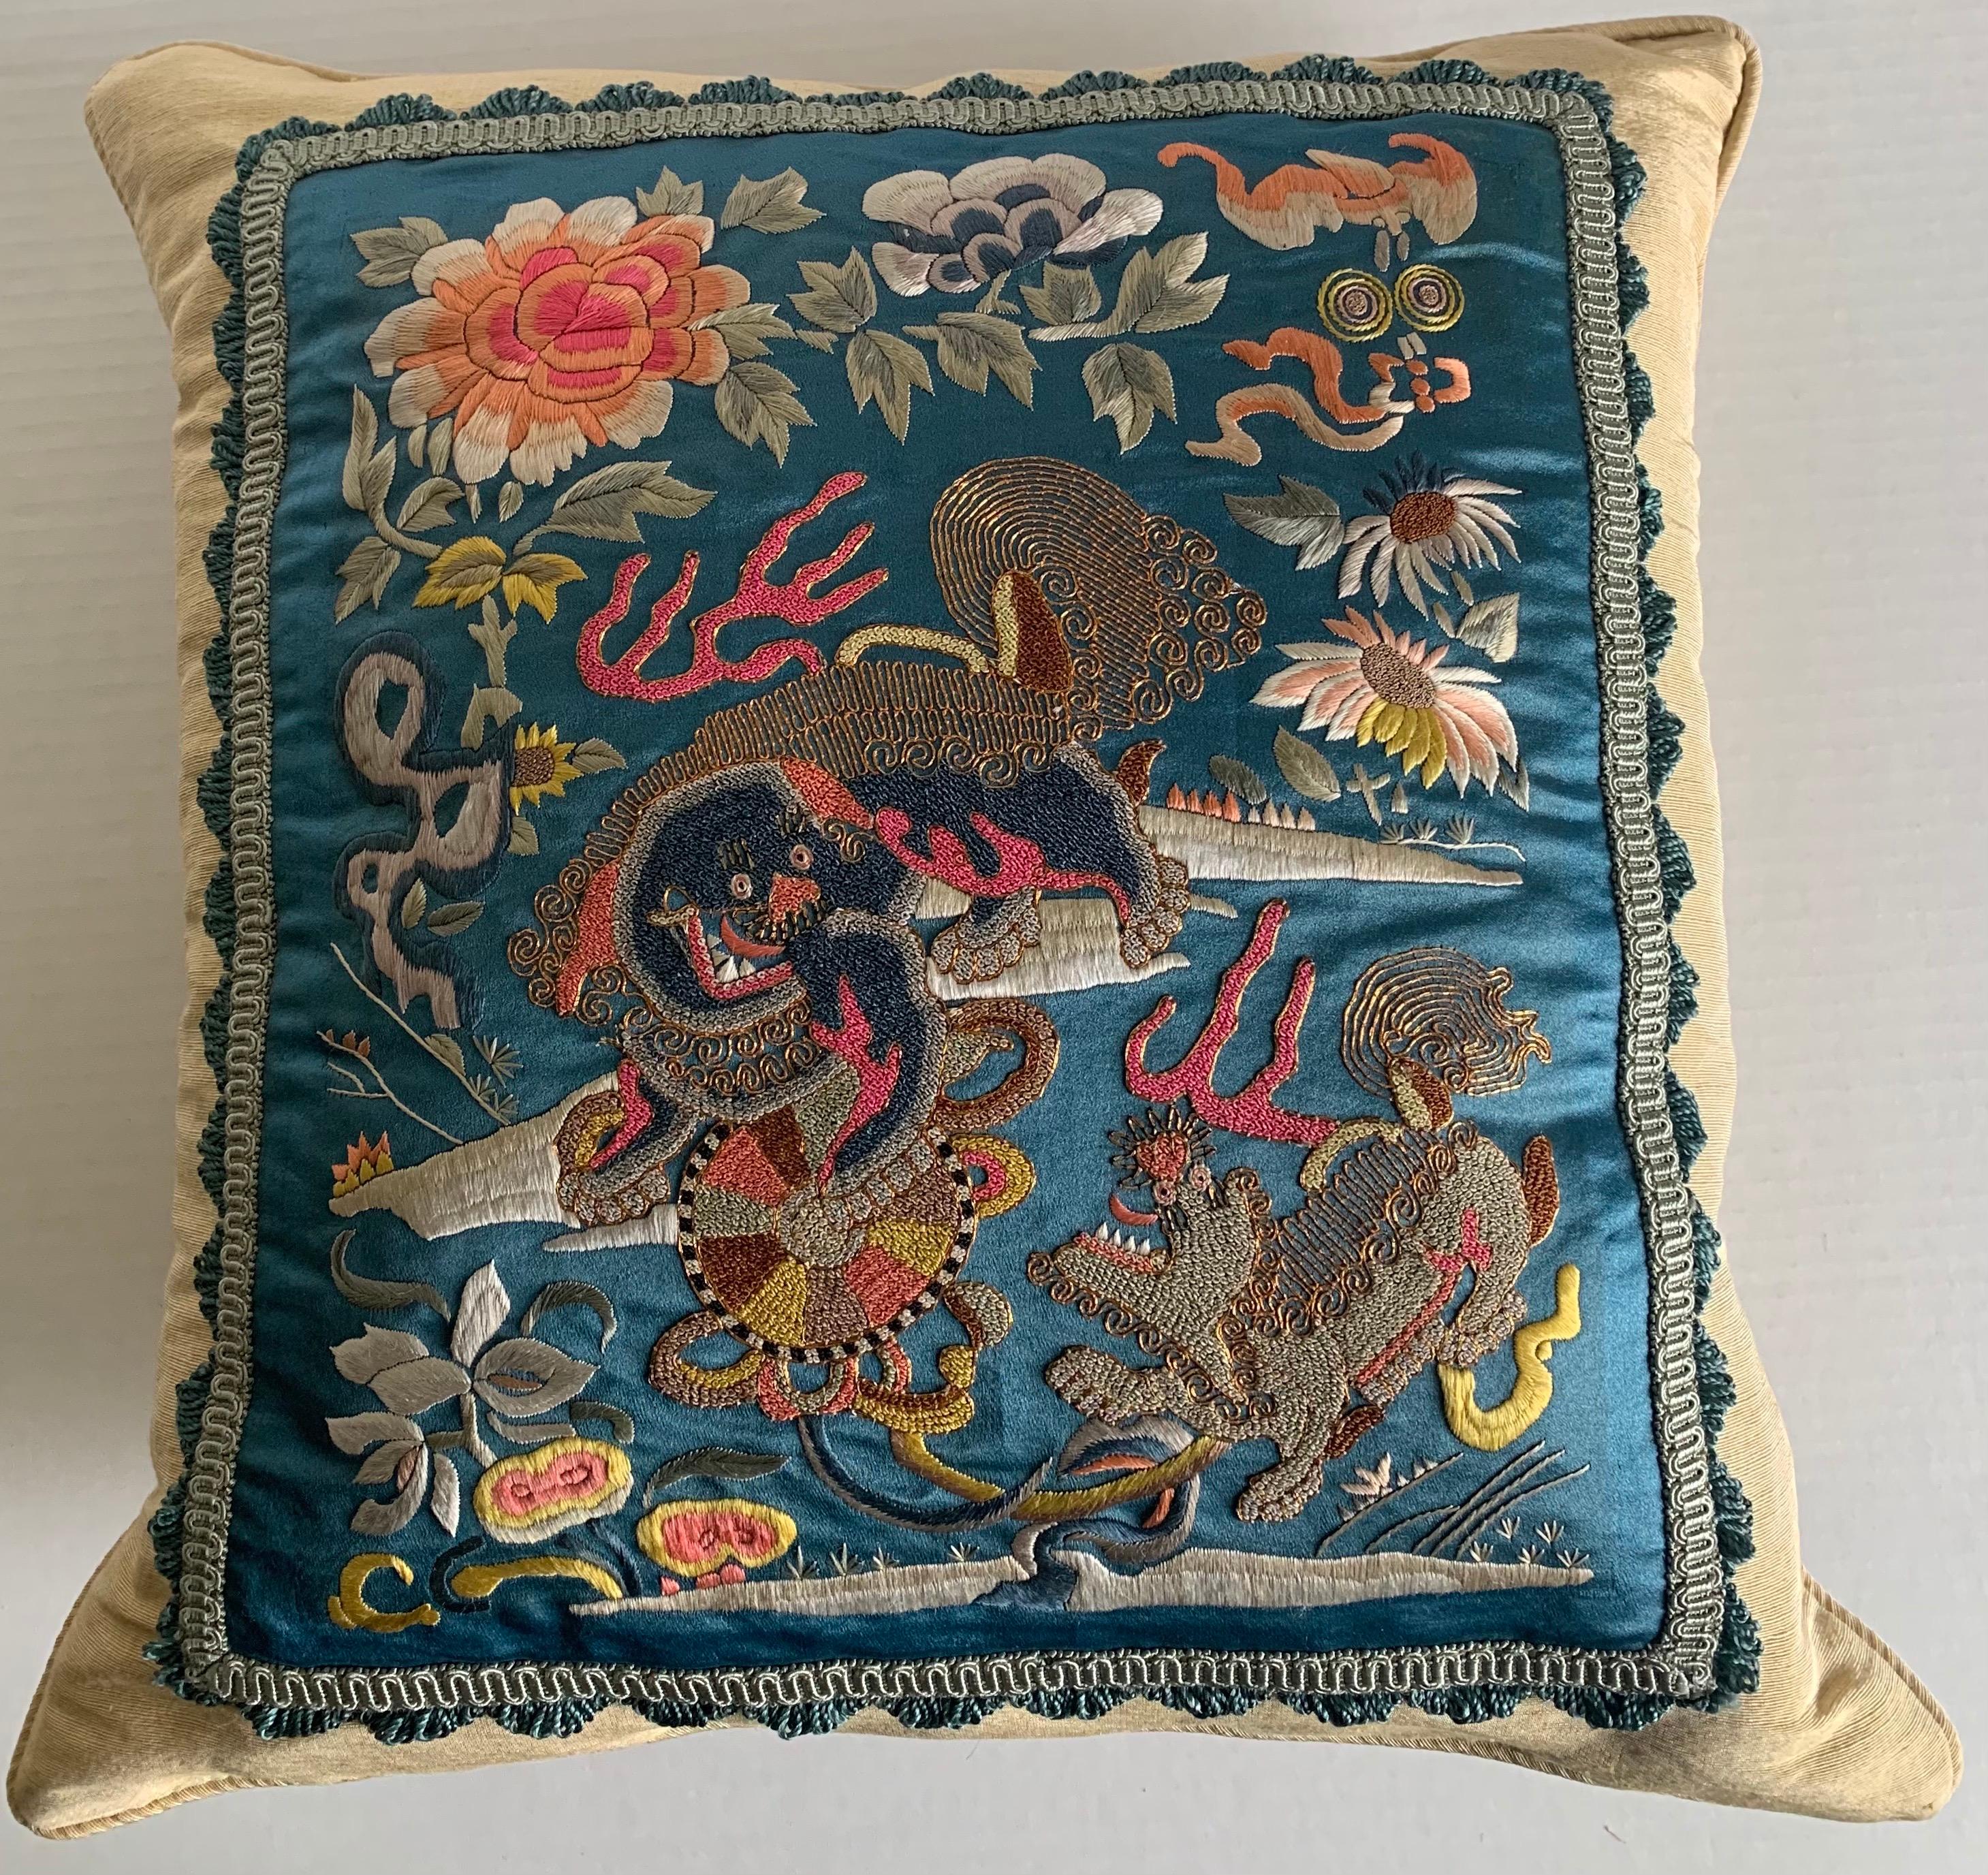 Antique Chinese embroidered textile made into a custom pillow. Antique blue woven satin silk textile featuring playful foo dog motif. 
Pillow is made of Claremont champagne silk with brushed fringe and gimp trim. 
Sewn shut style, pillow is 100%